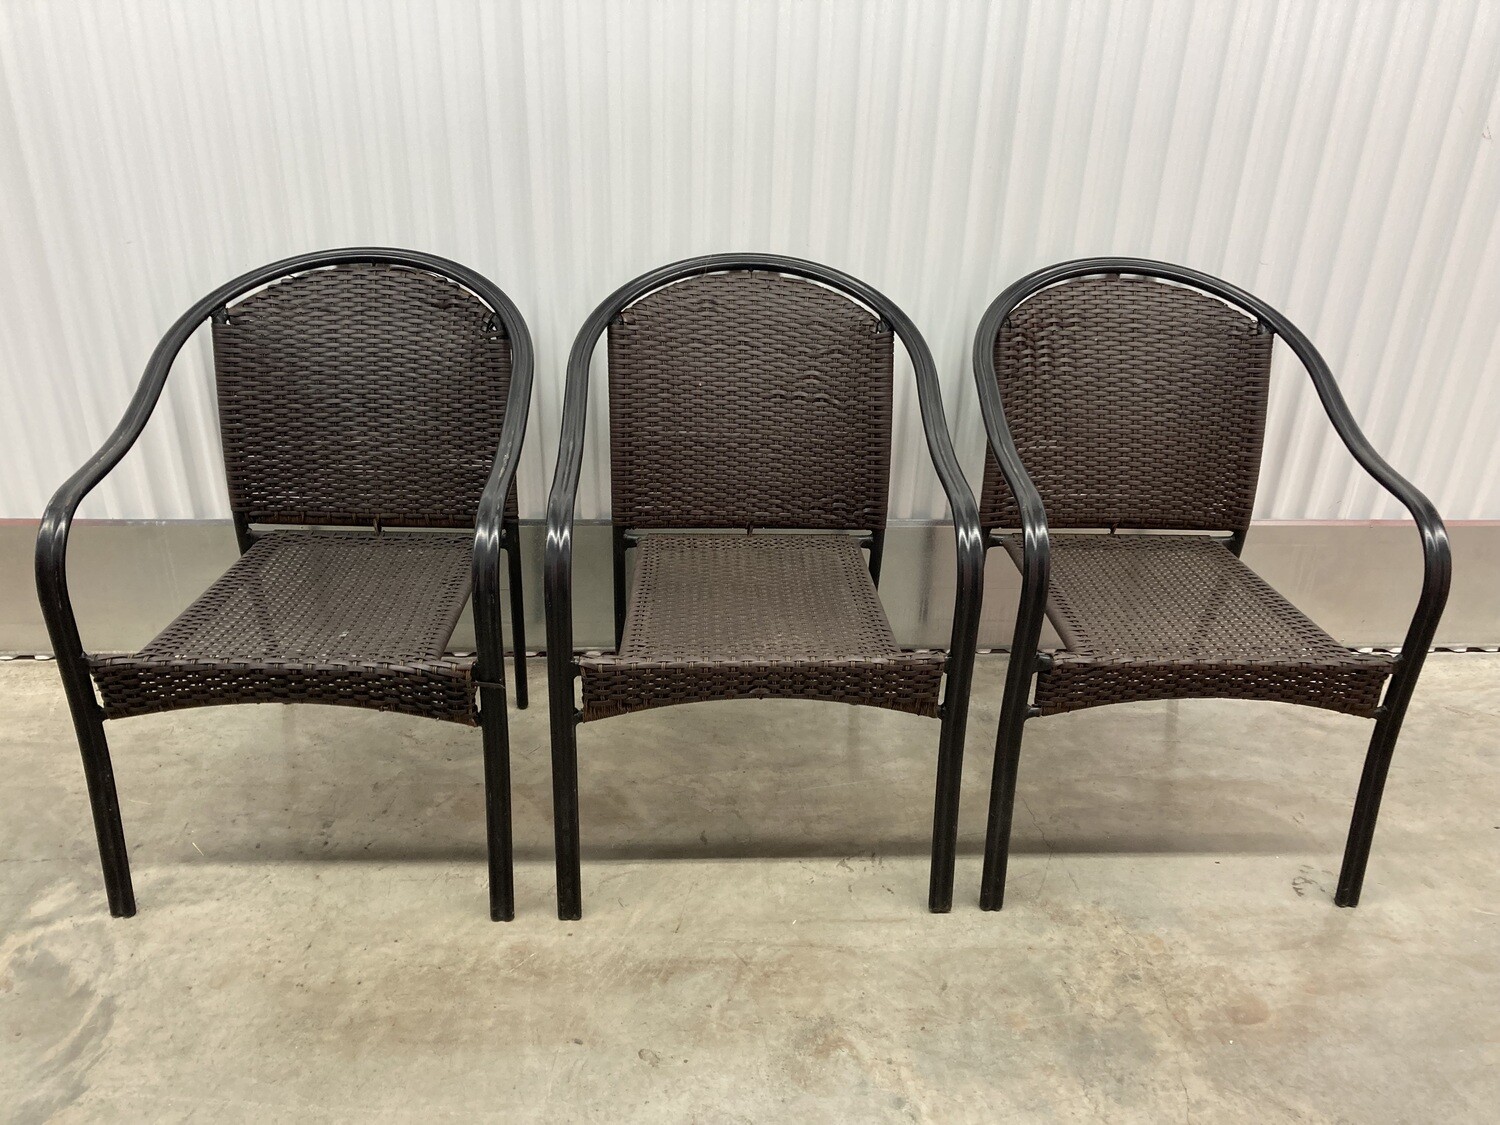 Patio Chairs, set of 3 #2114